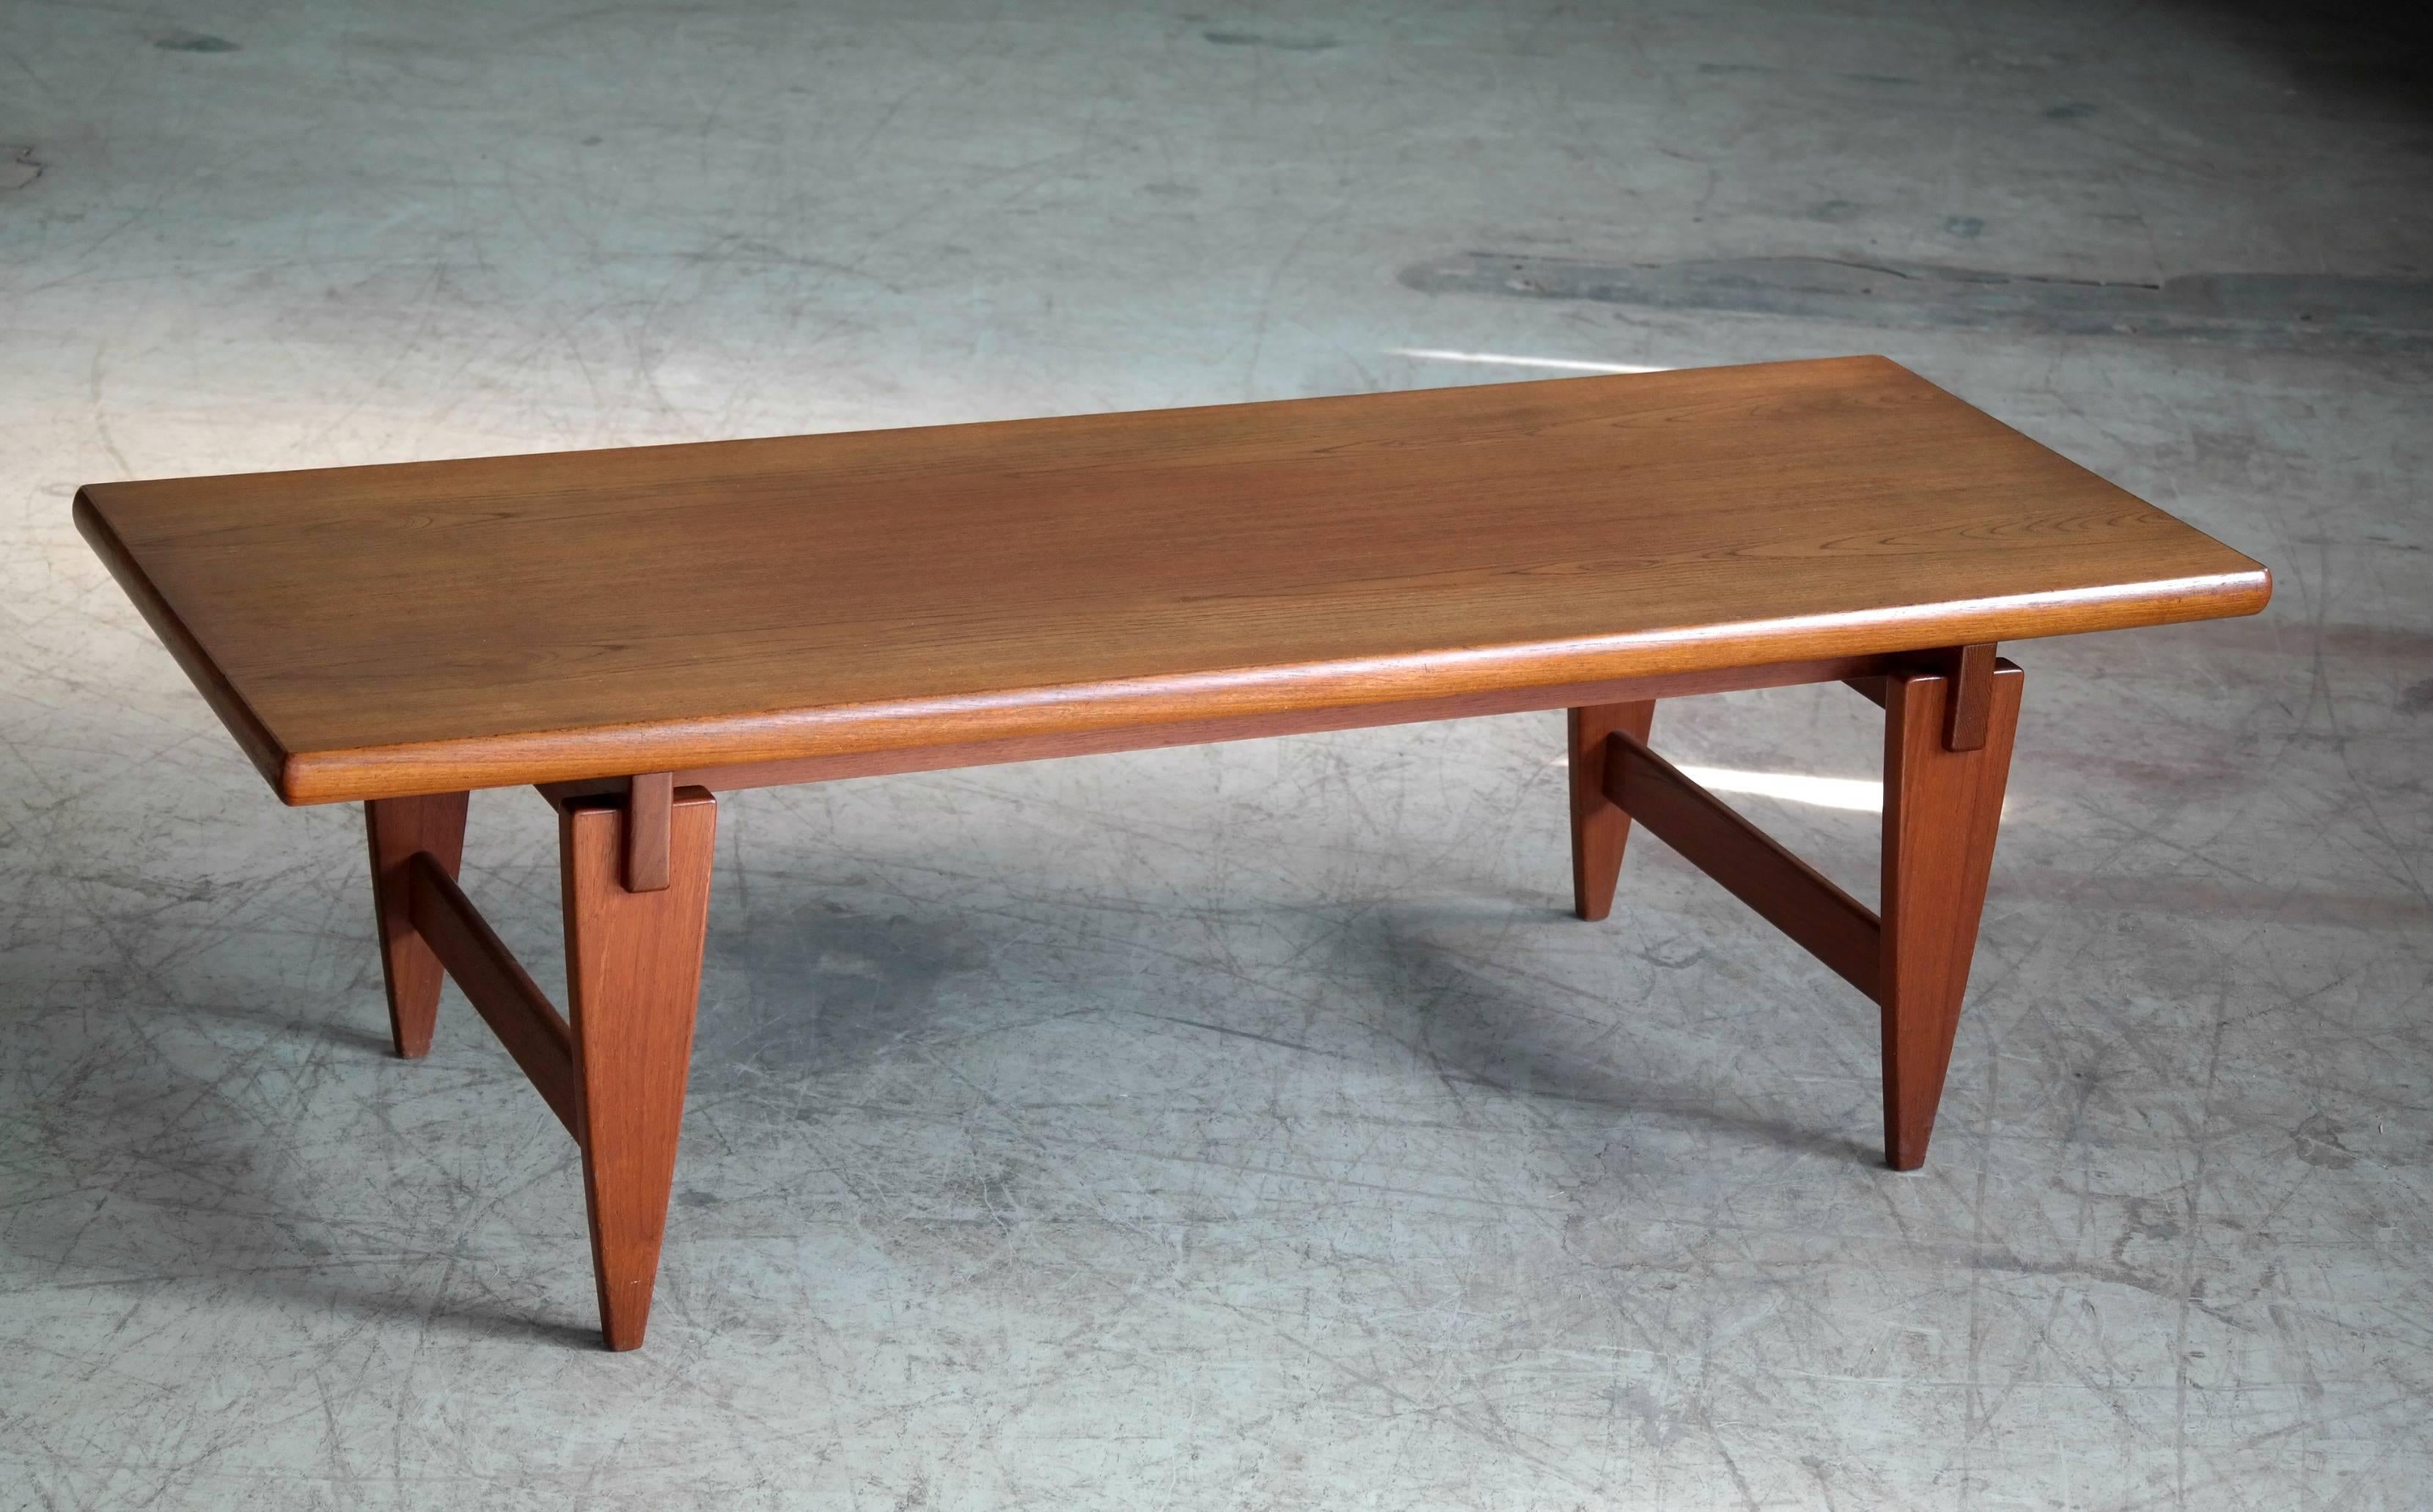 Beautiful coffee table by Illum Wikkelsø with distinctive triangular legs and floating top. Made in 1960s with a teak veneers top resting on a solid teak base and legs. This table has a strong, graceful presence with its rather solid upper resting